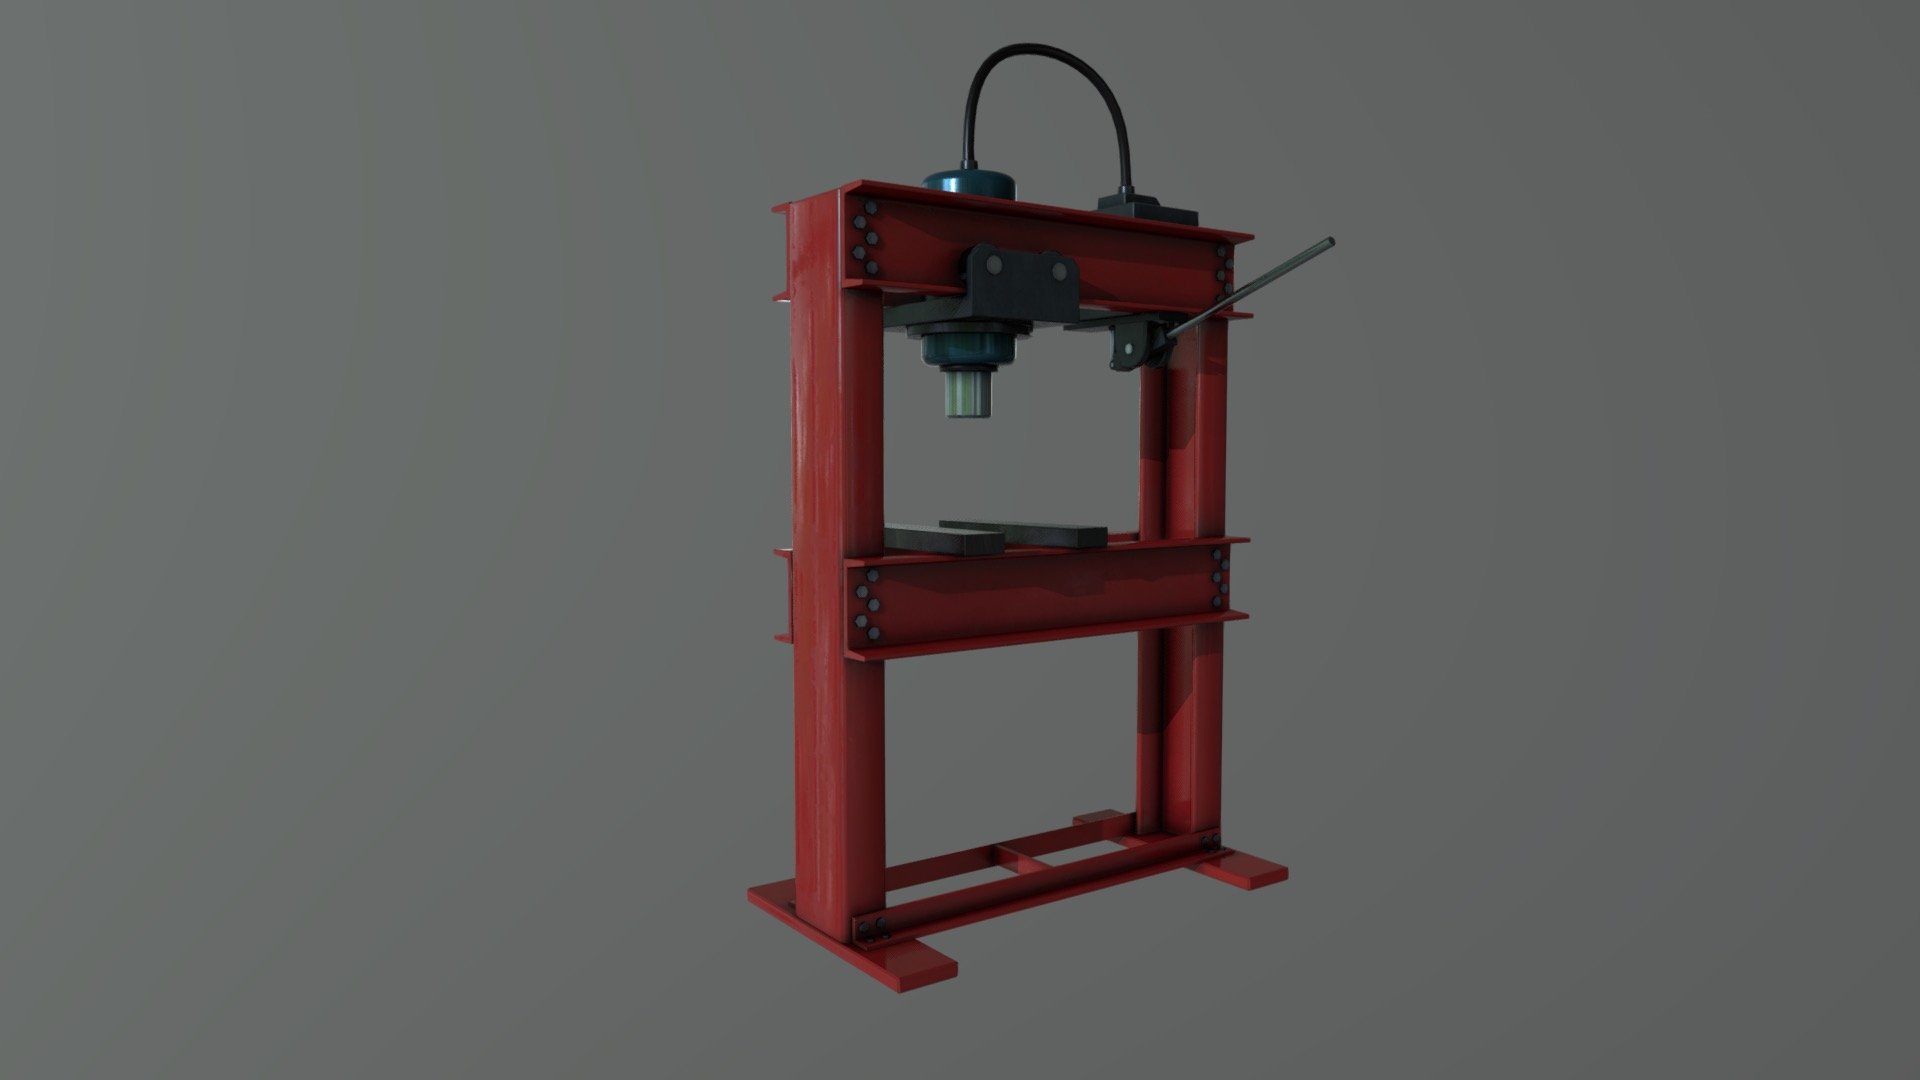 3D model of a hydraulic press. Polycount is lowisch.. AR and VR friendly 3d model